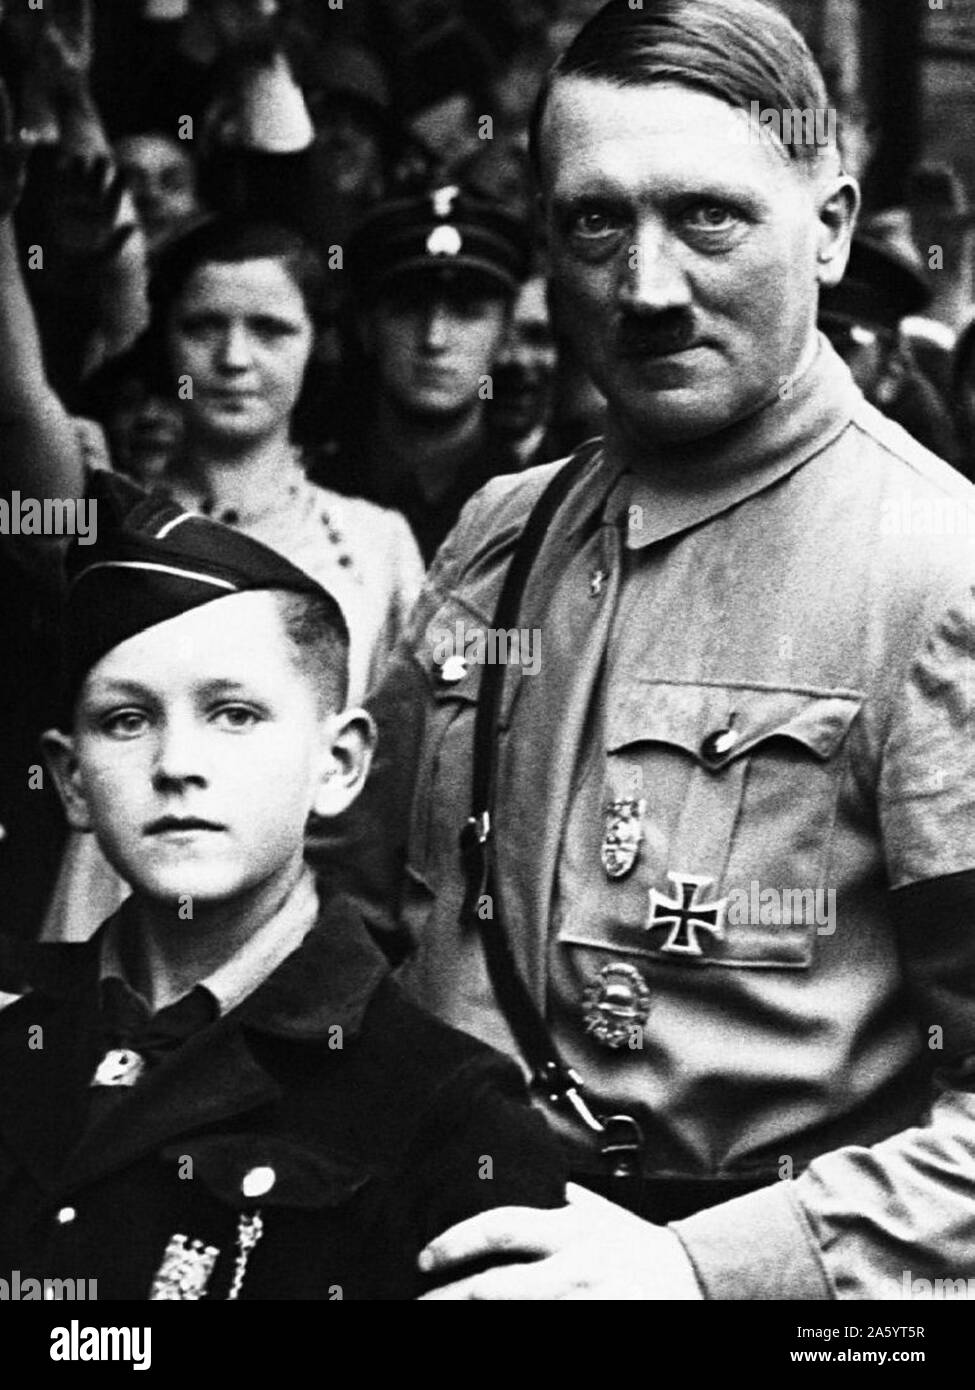 Adolf Hitler 1889-1945, German Nazi leader, seen standing with a young Hitler Youth Member 1934 Stock Photo